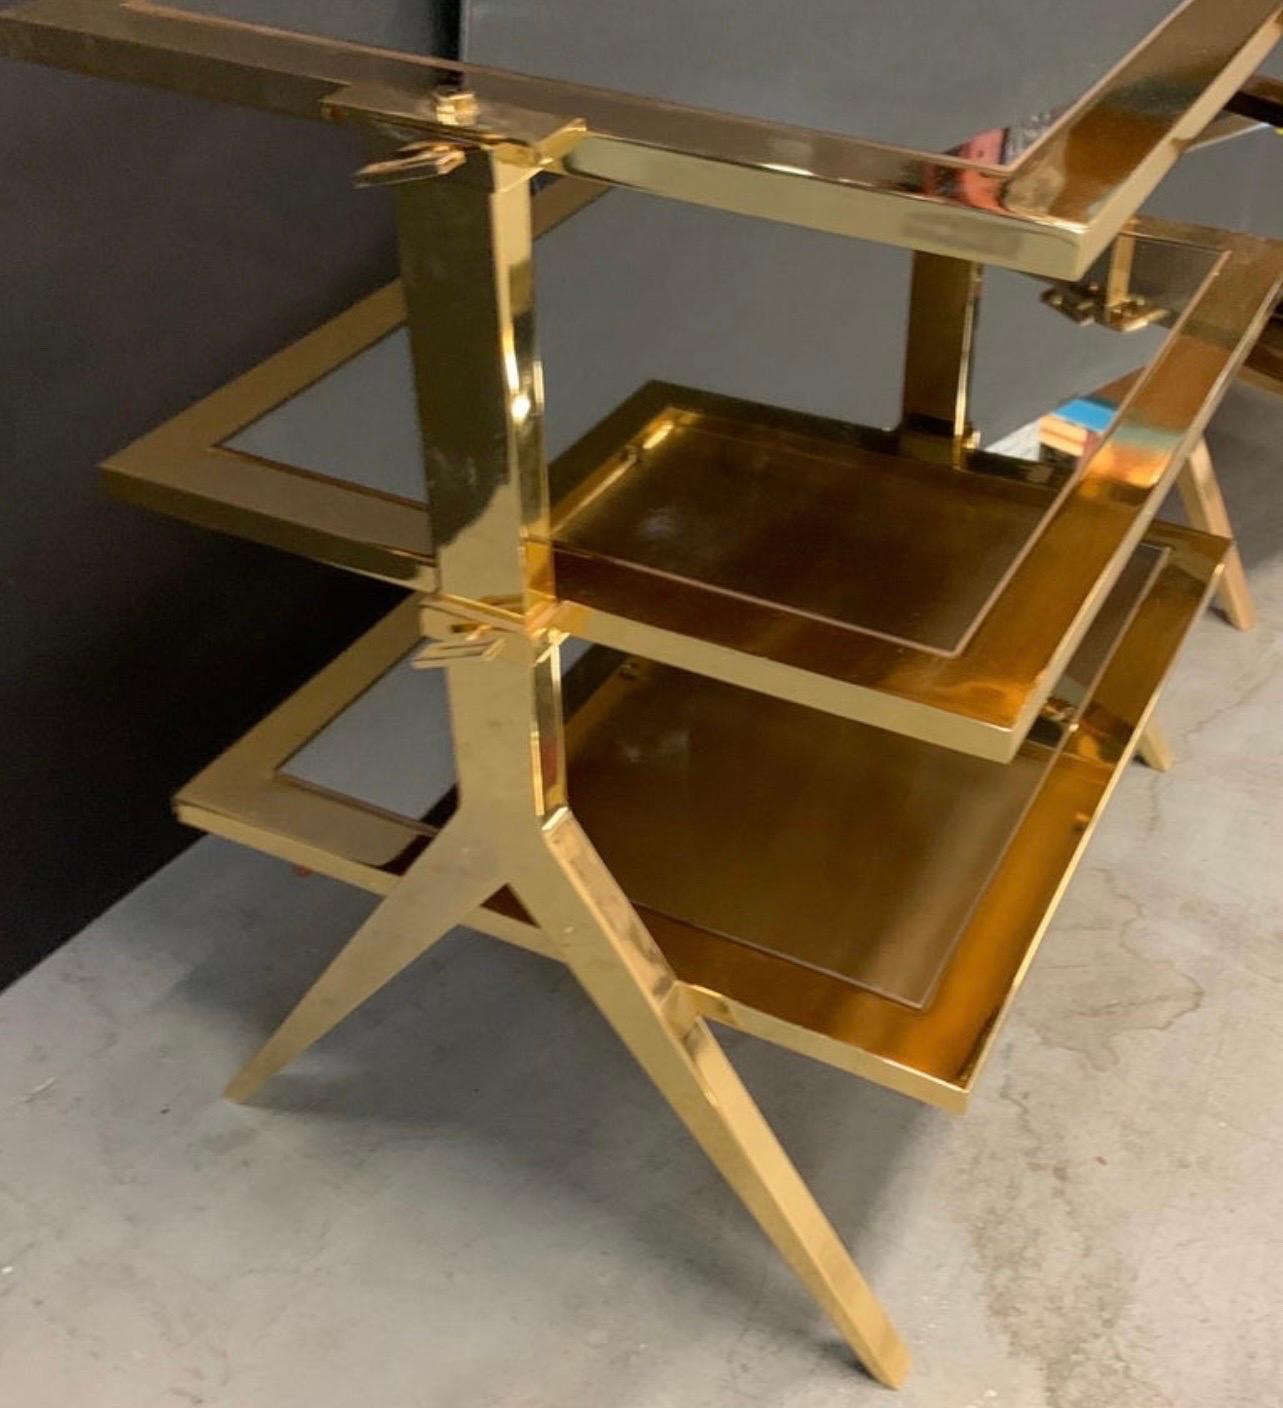 A wonderful modern Lorin Marsh polished brass and mirror inset three-tier side table

Measurements:
28.5